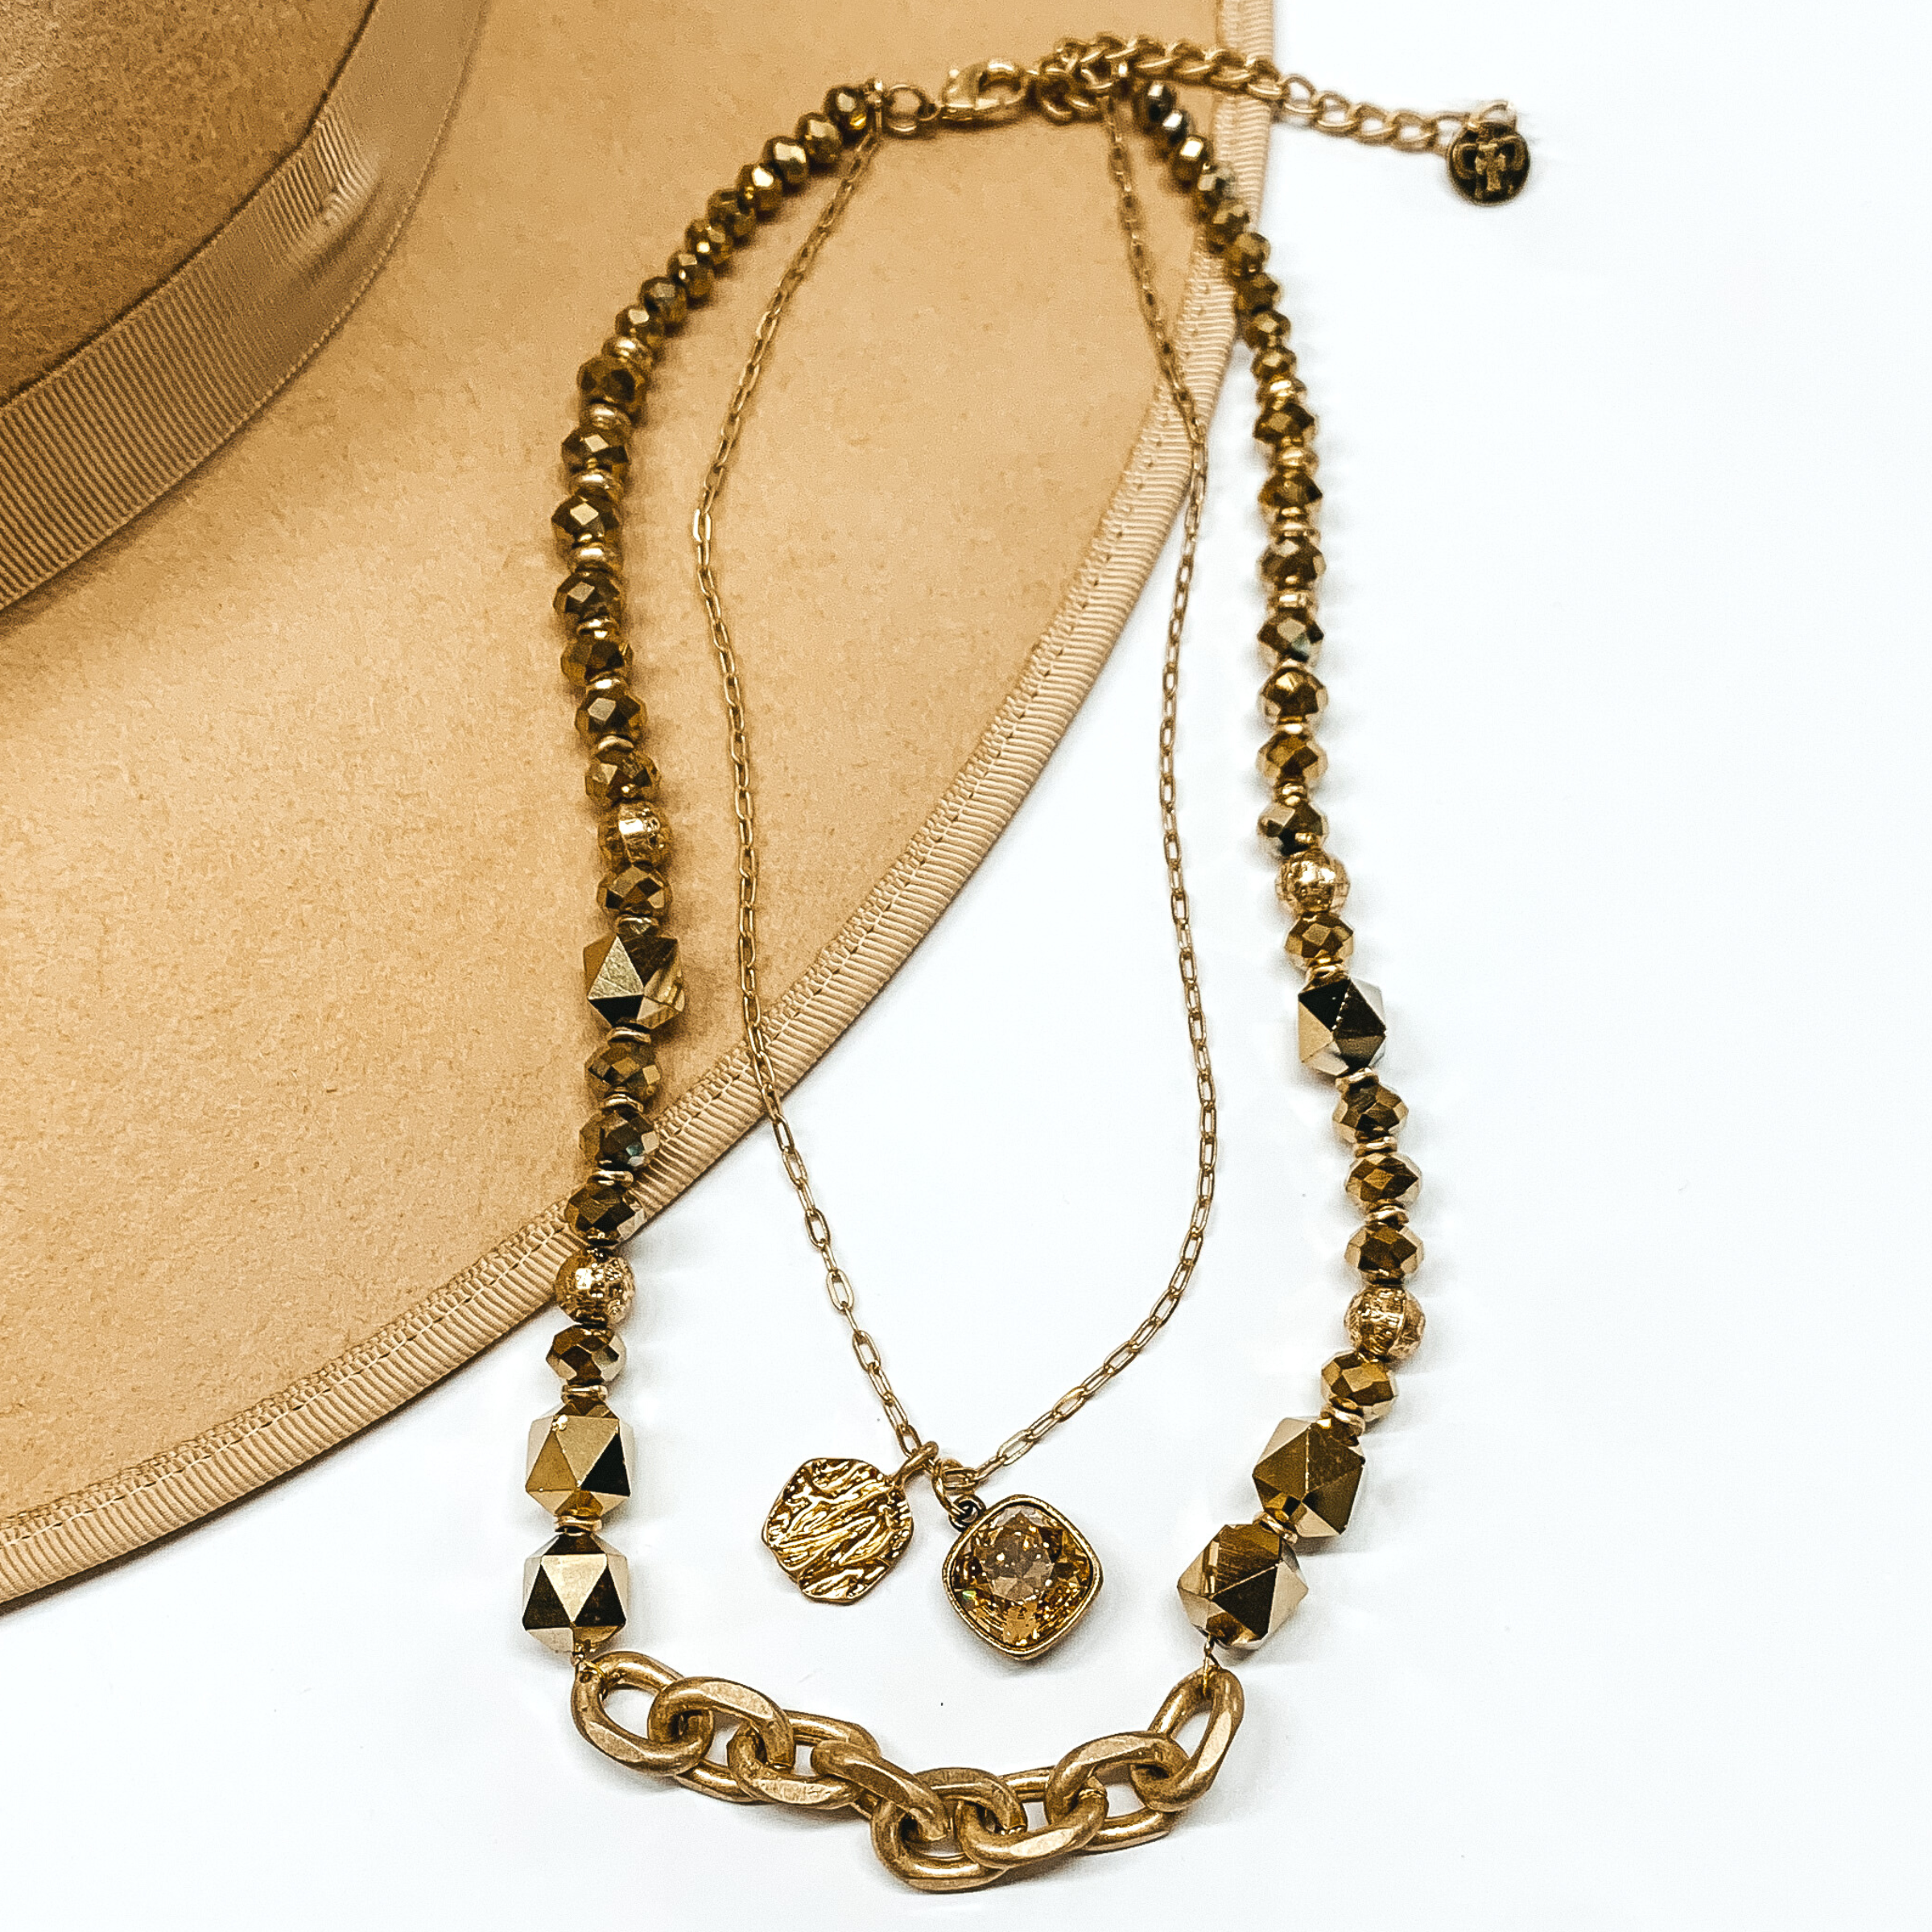 This is a two strand necklace that has one short dainty chain and a longer gold crystal beaded strand with a gold chain segment. The shorter chain includes a gold coin charm and golden shadow cushion cut crytal charm. This necklace is pictured partially laying on a tan brim on a white background. 